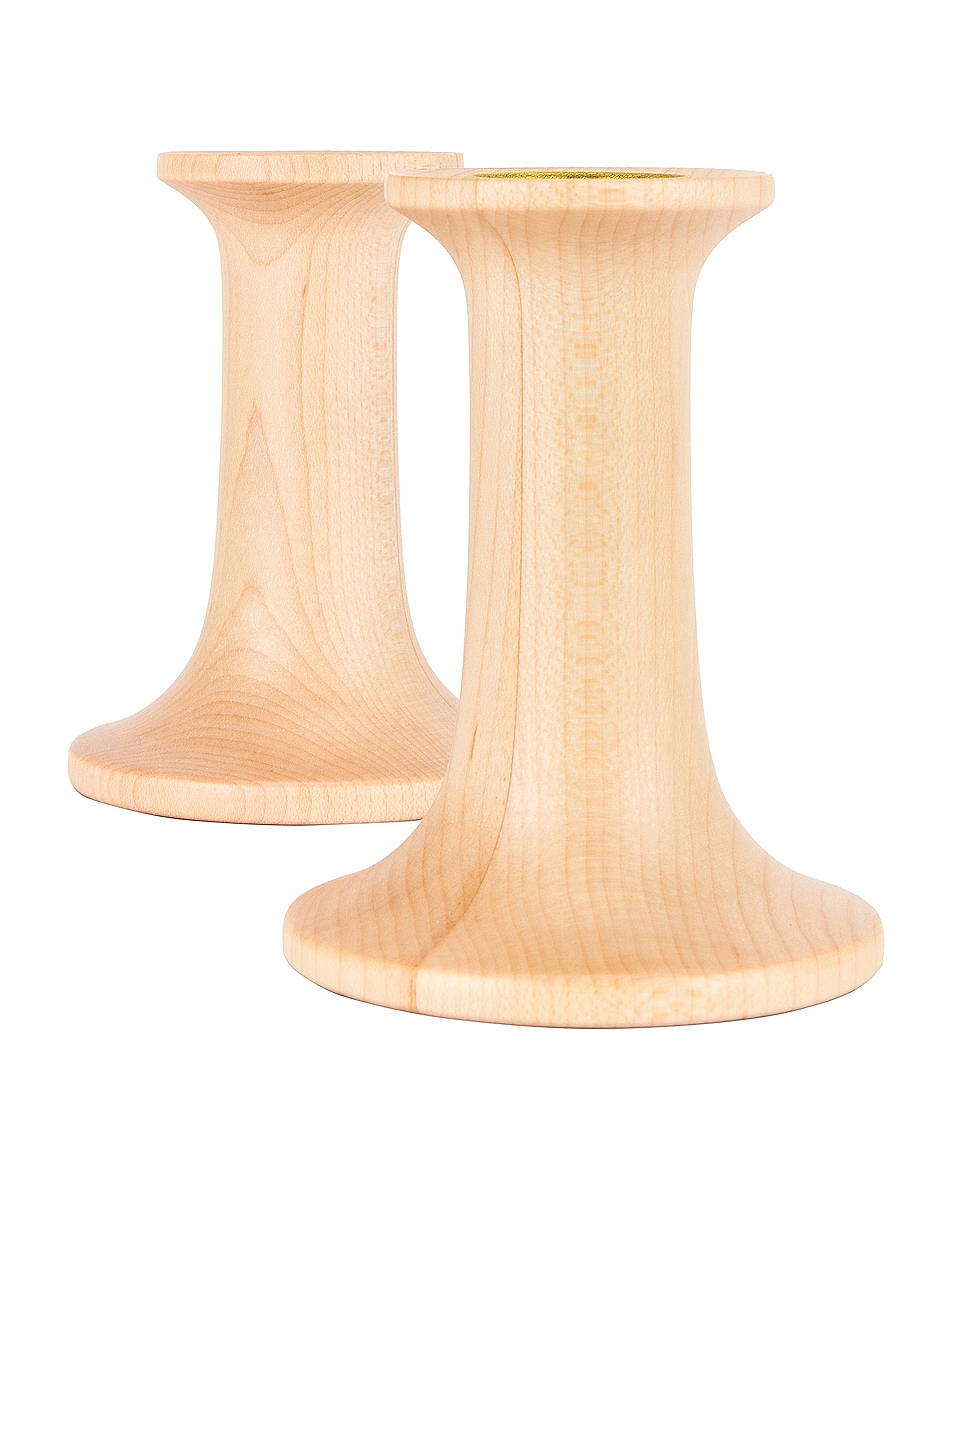 Image 1 of HAWKINS NEW YORK Set of 2 Extra Small Simple Candle Holder in Maple